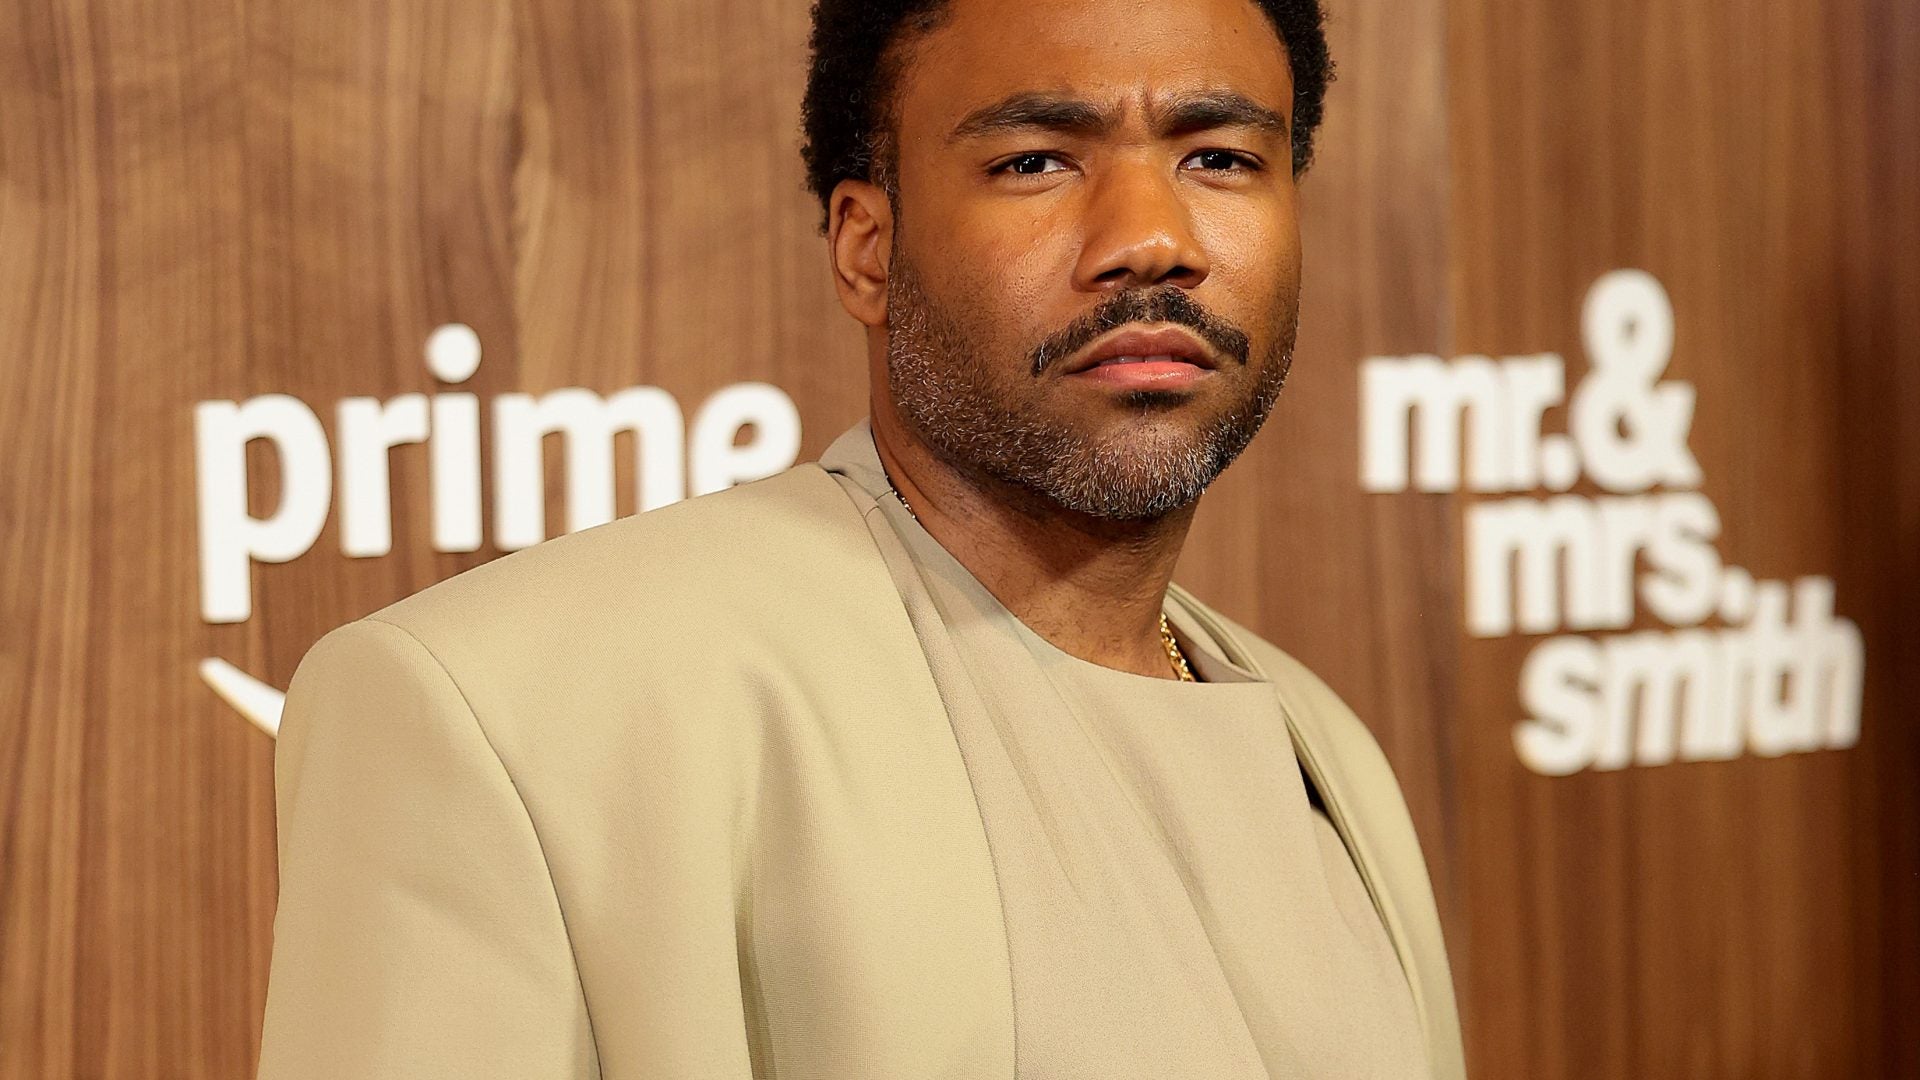 Donald Glover Responds To Accusations Of Misogynoir: "That Hurts Me"